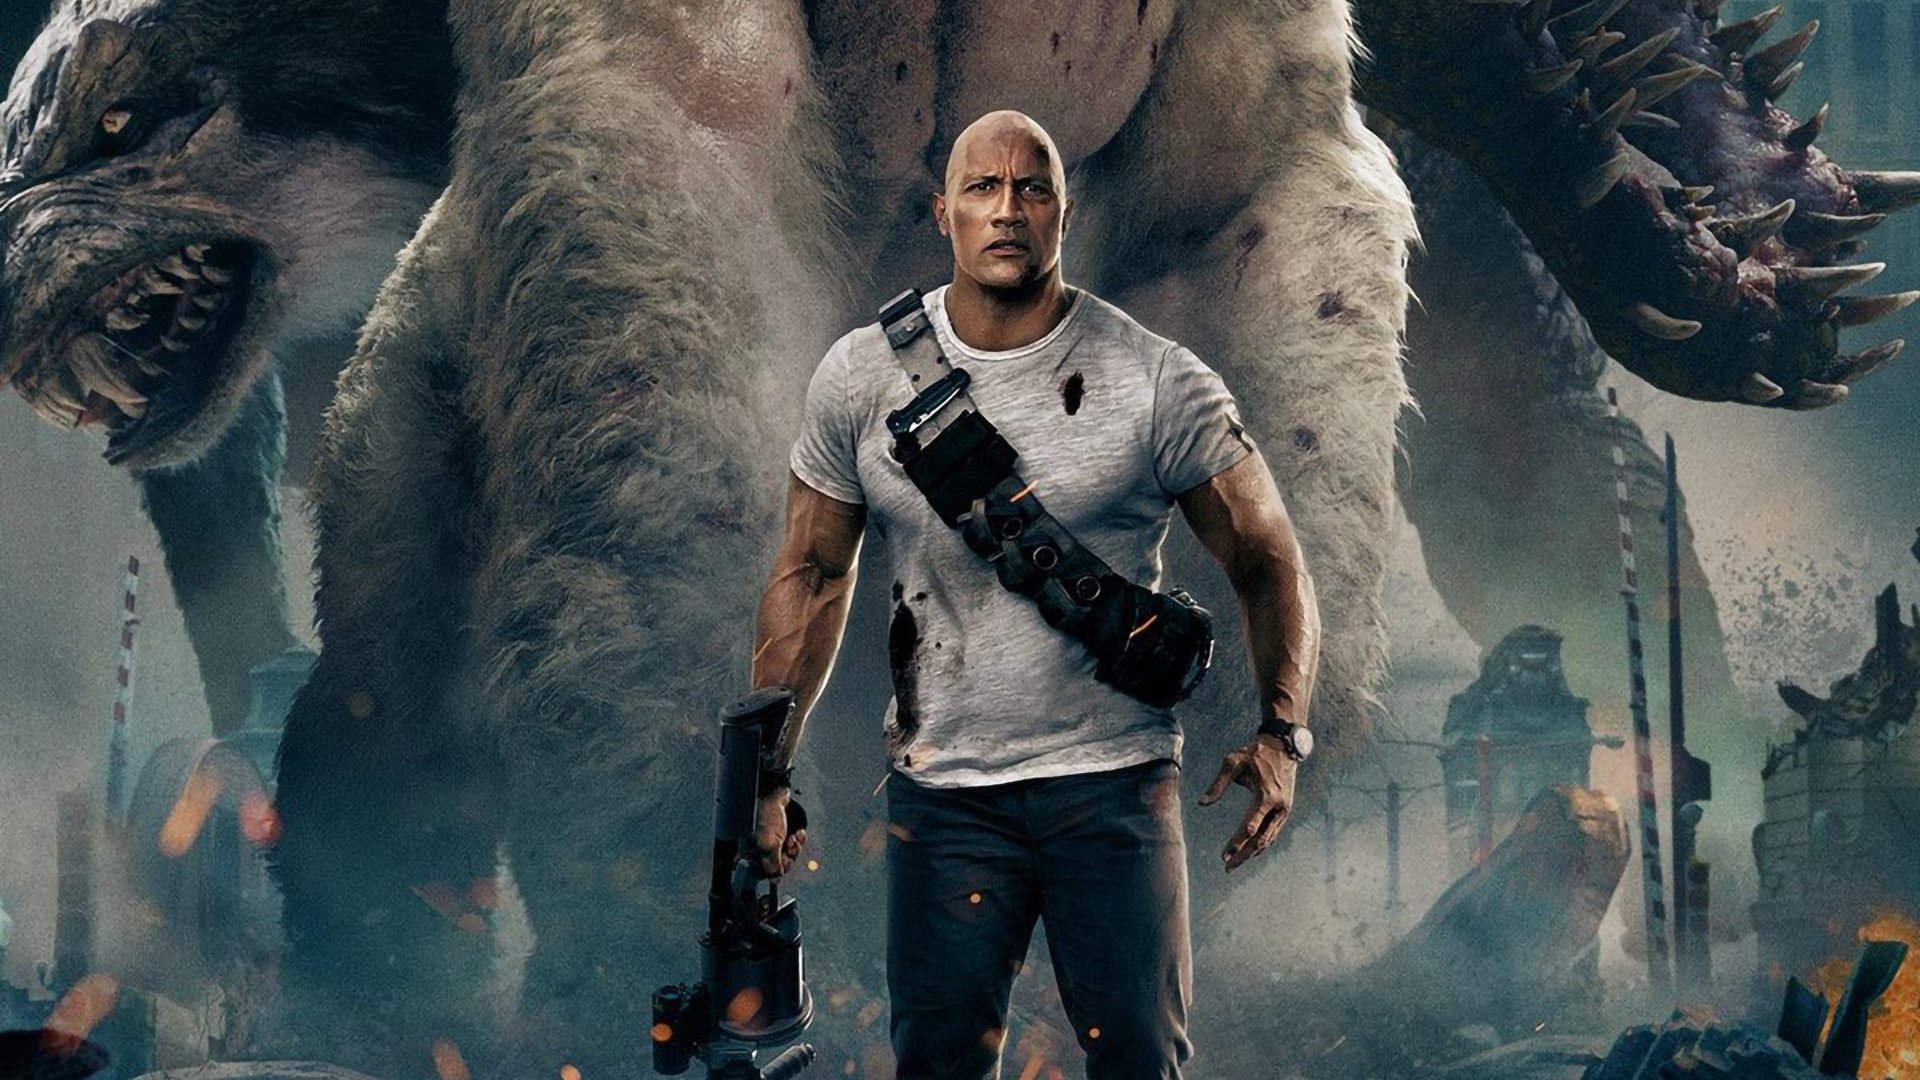 The rock new movie